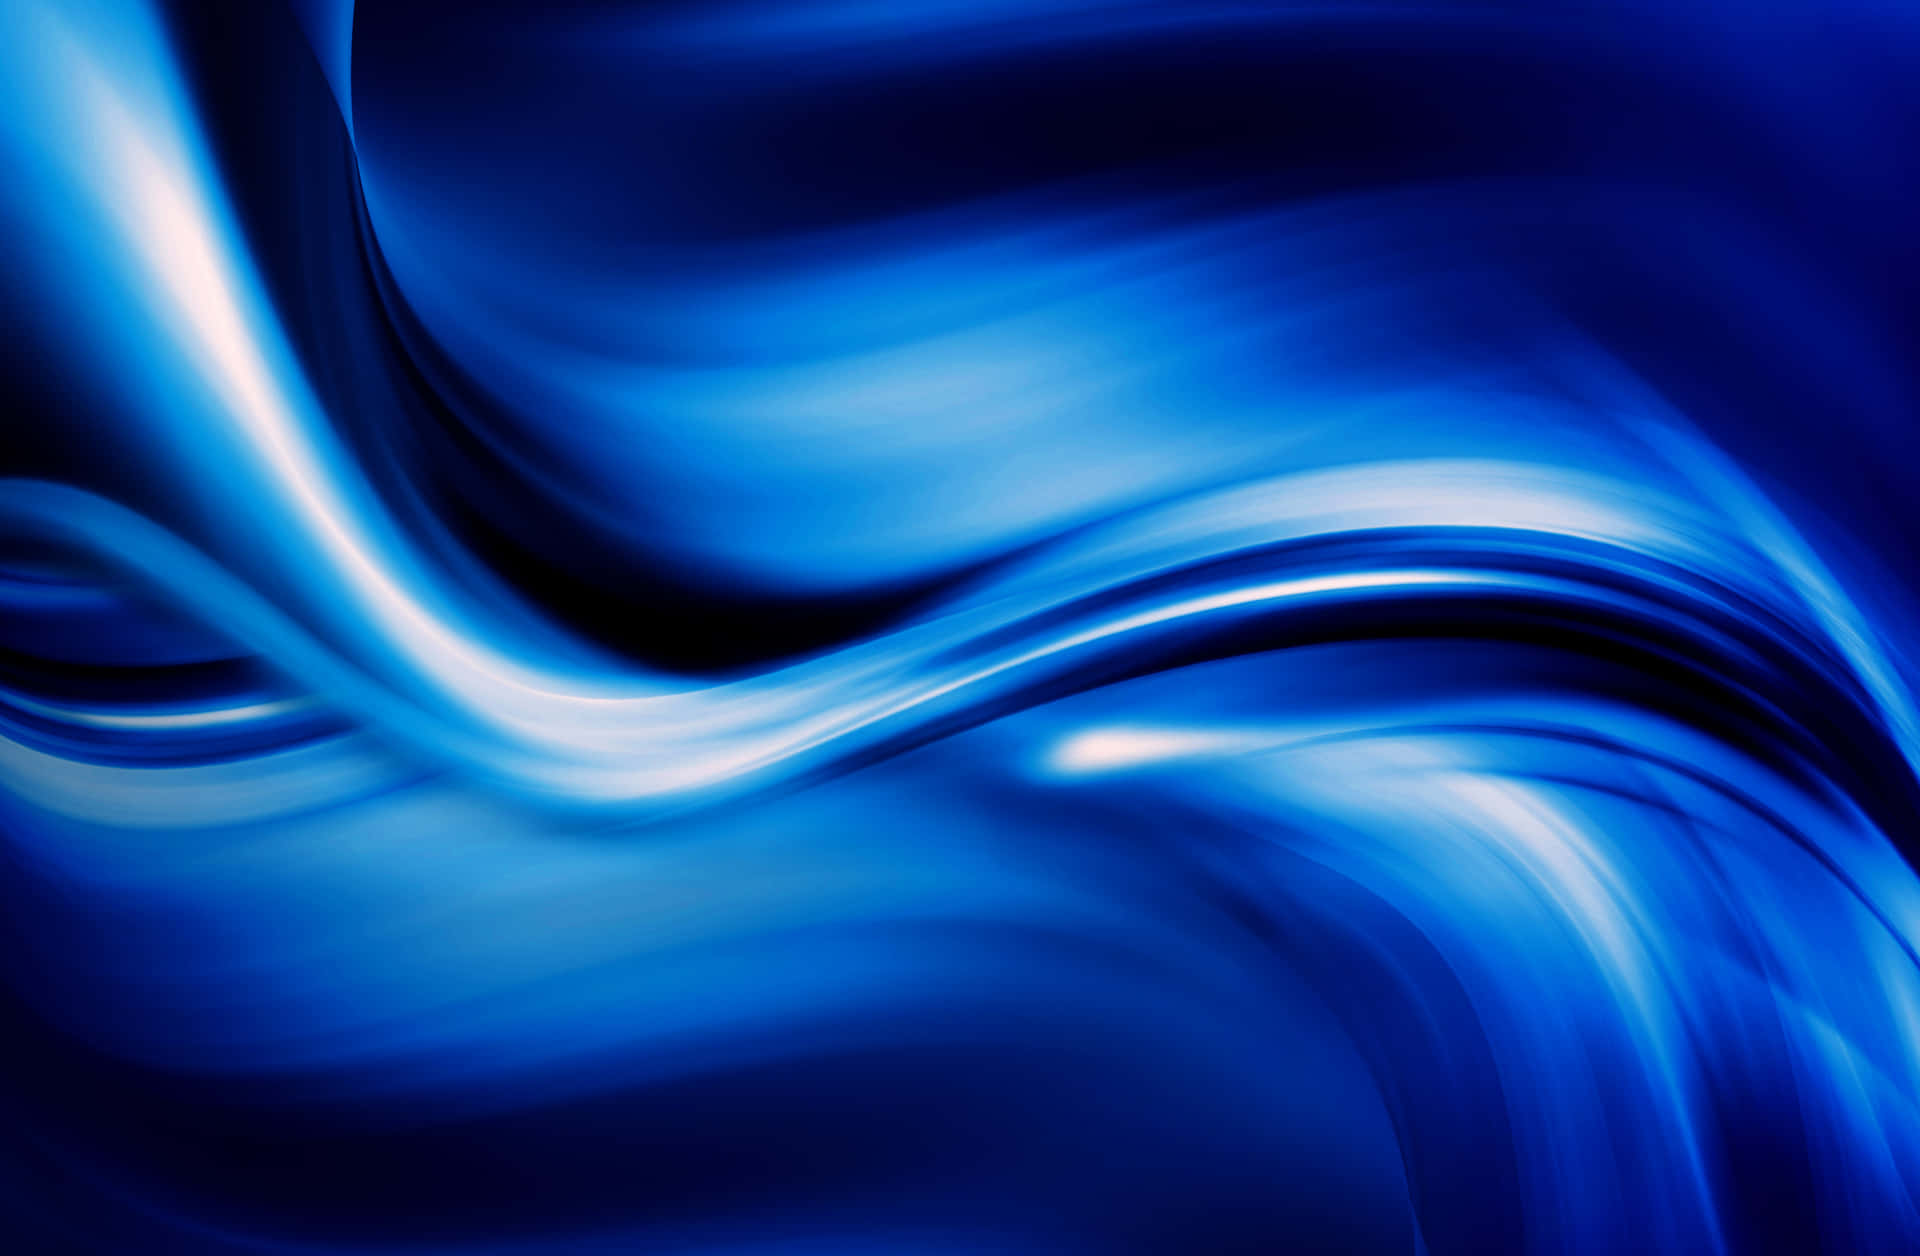 Explore the Beauty of this Blue Abstract Background